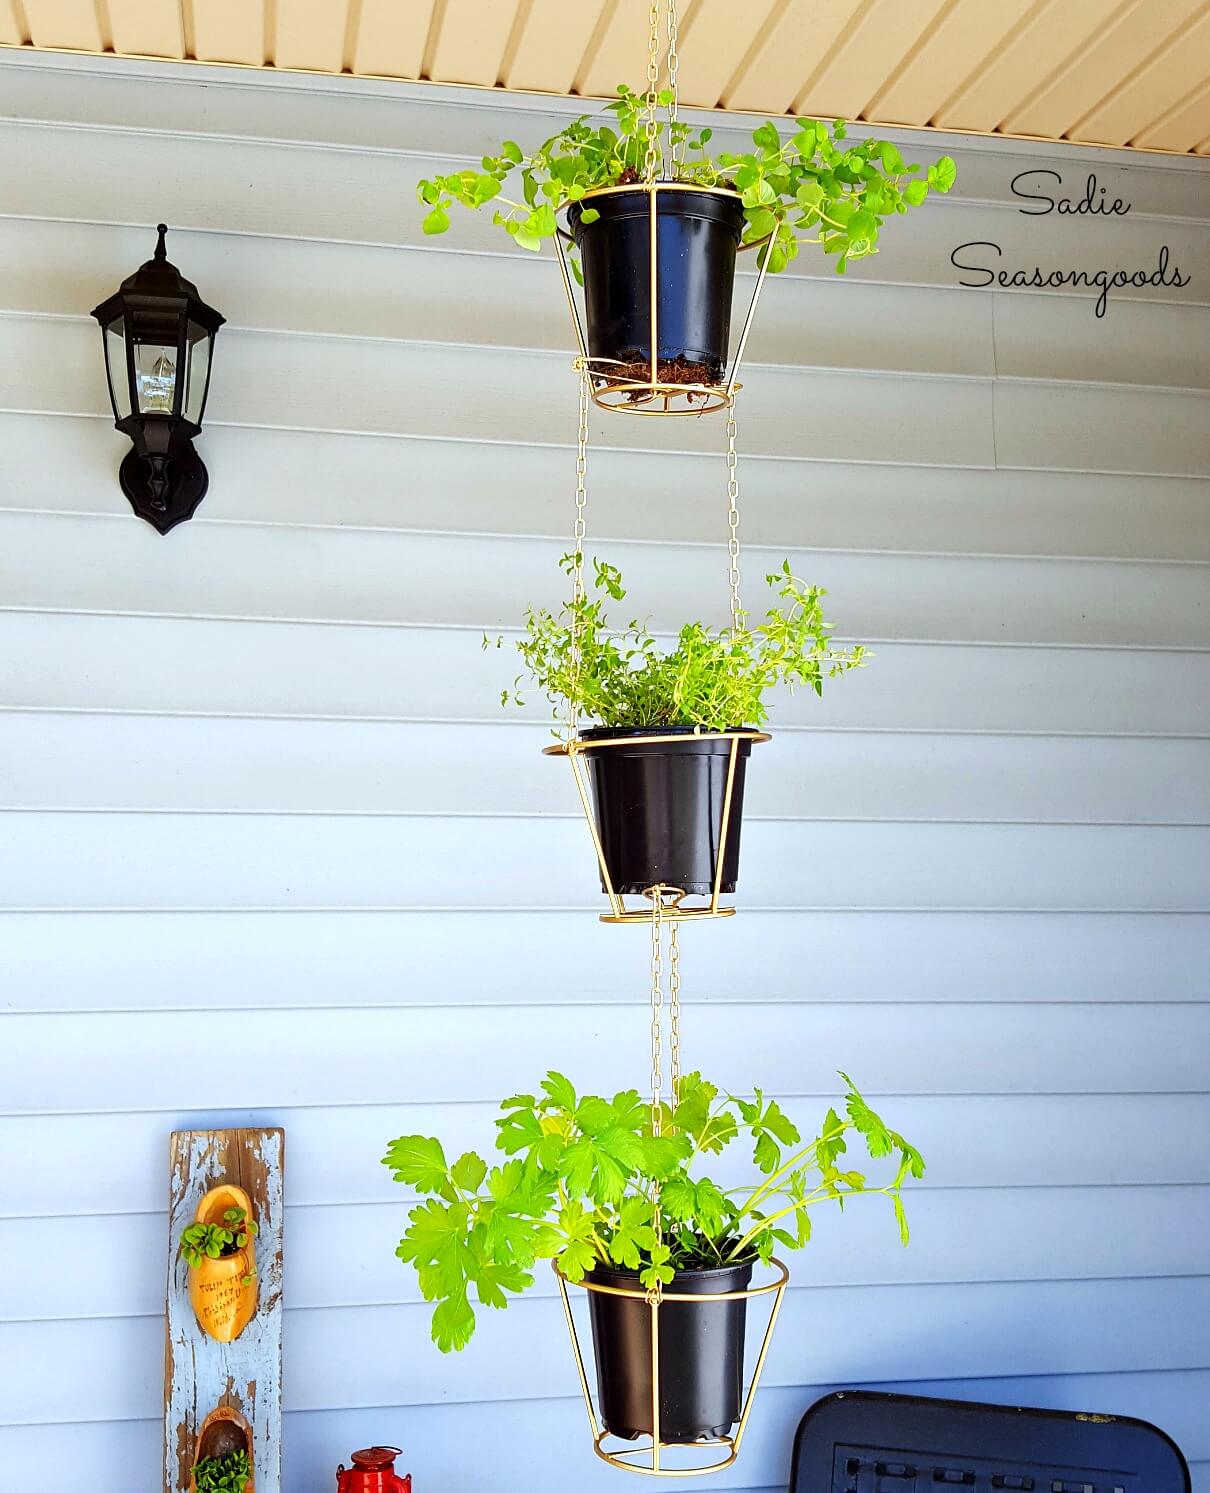 Lampshades Repurposed Into Hanging Herb Baskets | Low-Budget DIY Garden Pots and Containers